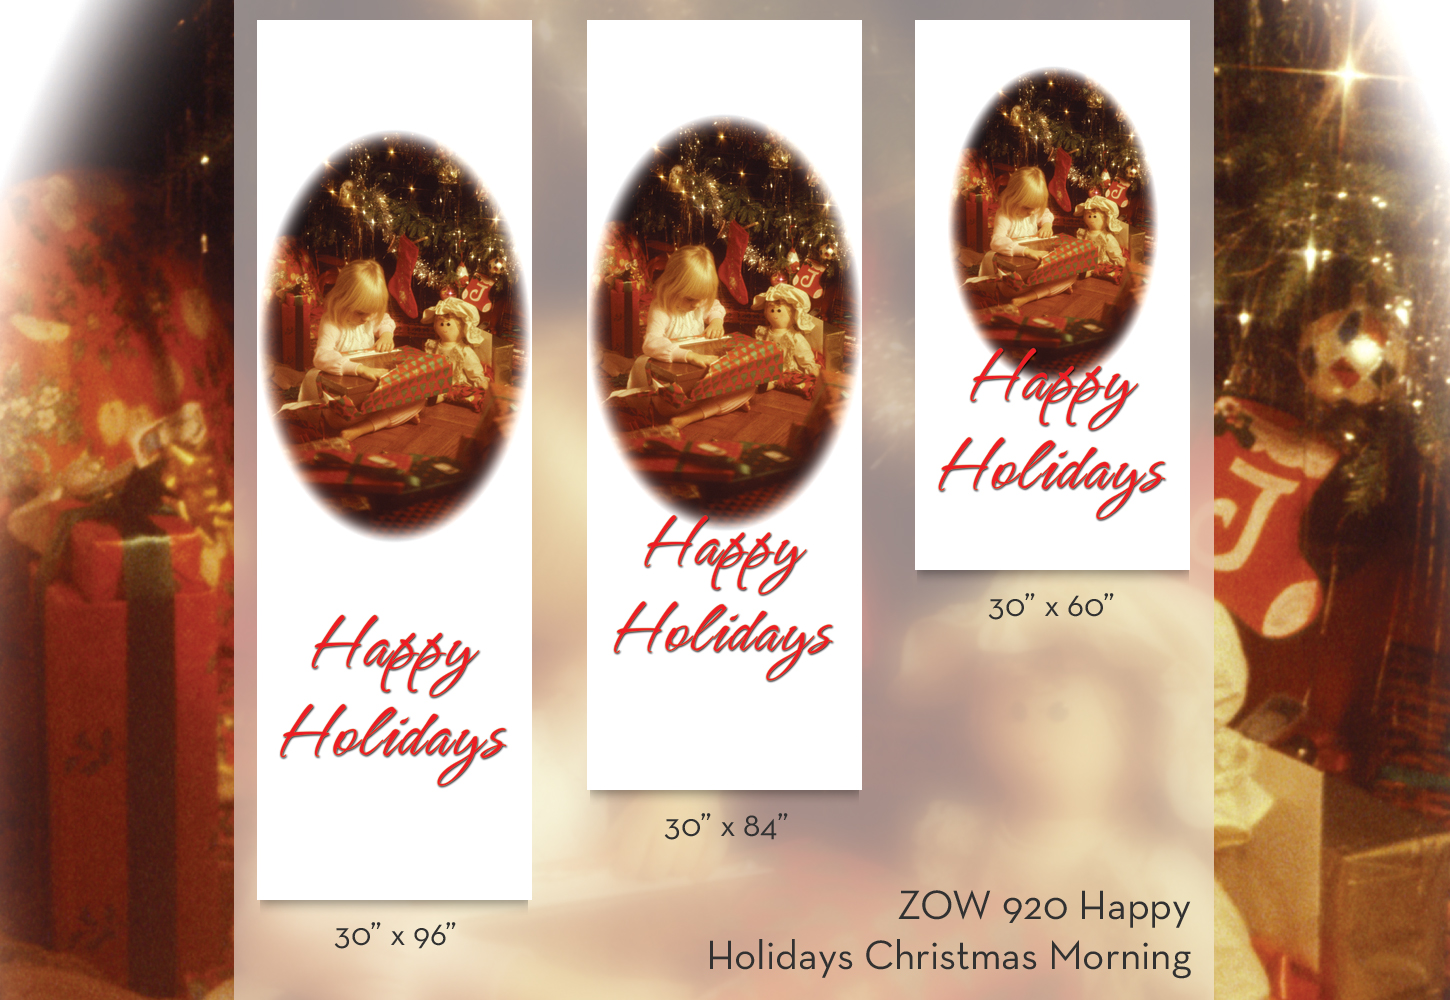 ZOW 920 Happy Holidays Christmas Morning